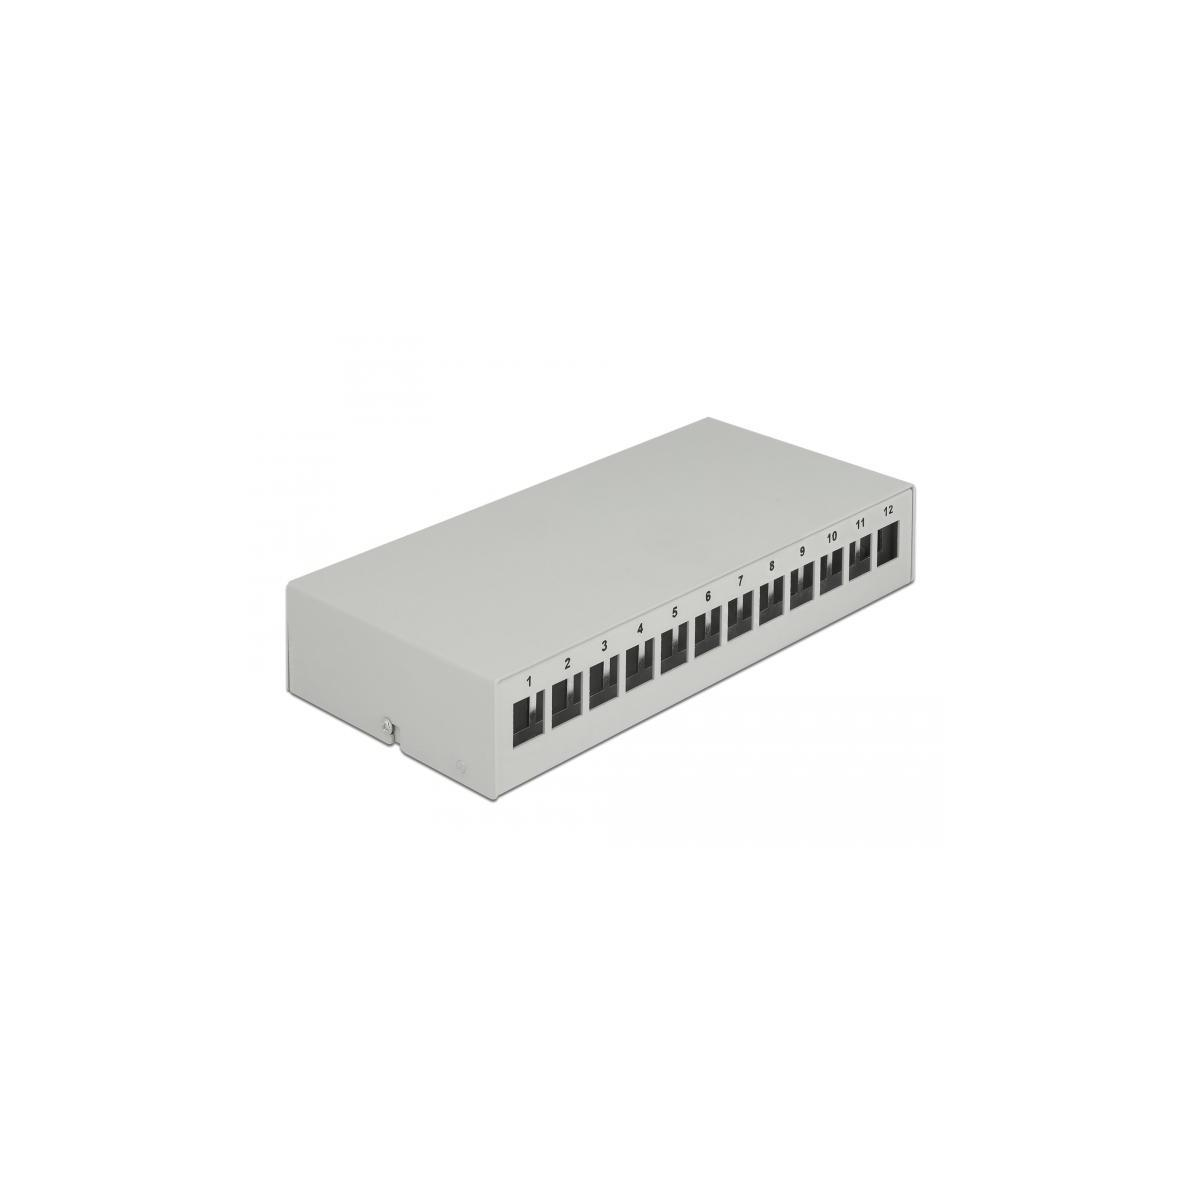 DELOCK 43414 Patchpanel